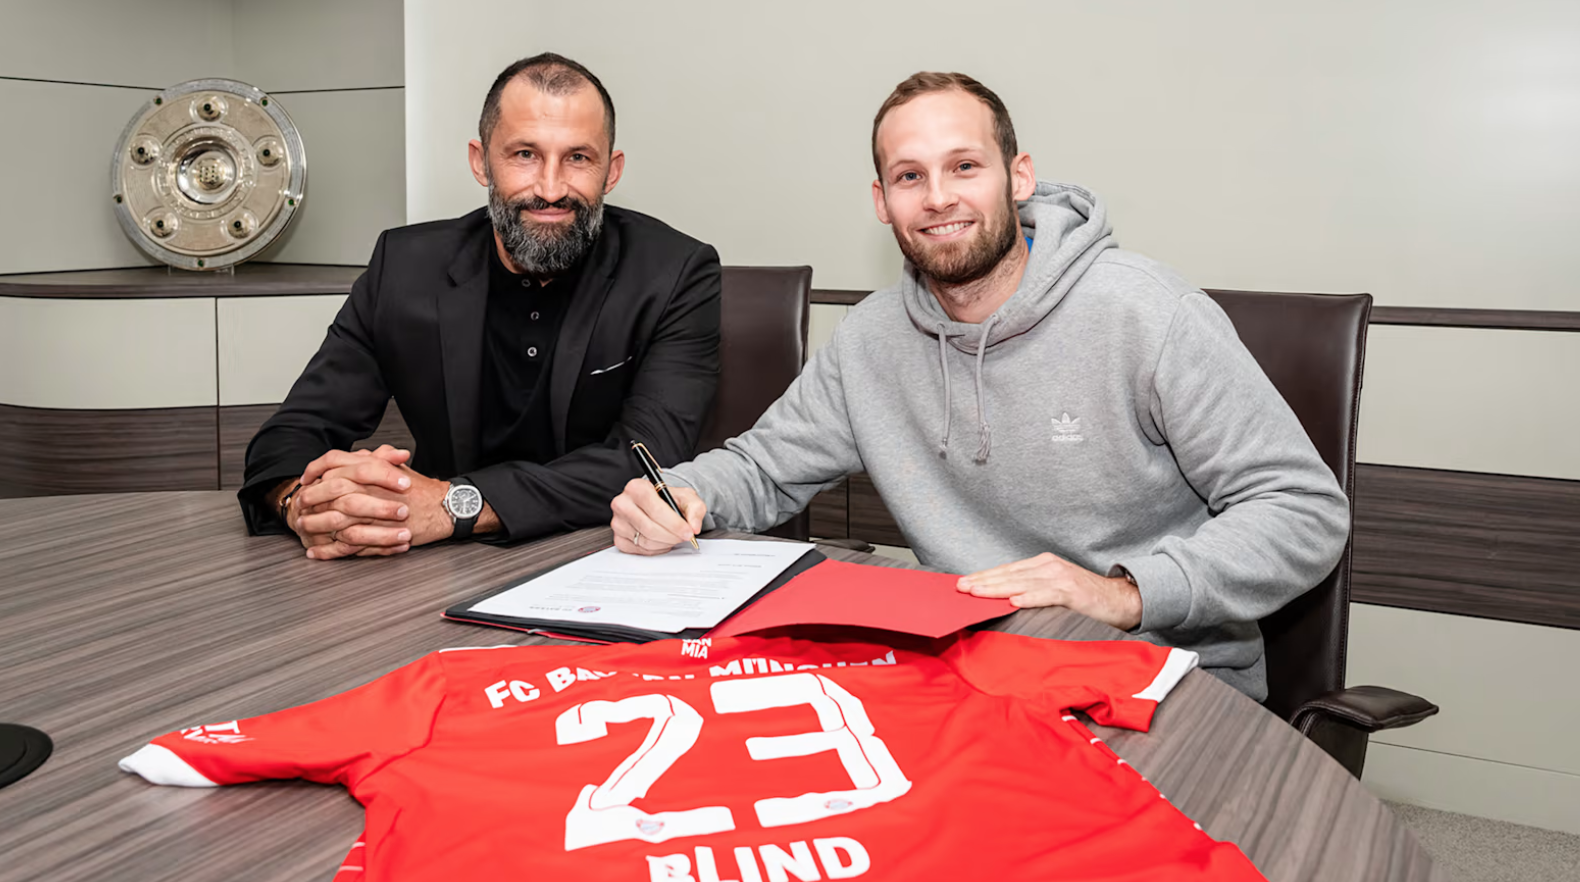 Daley Blind (R) sighs his contract with Bayern Munich on a deal till the end of the season in Munich, Germany, January 5, 2023. /CFP